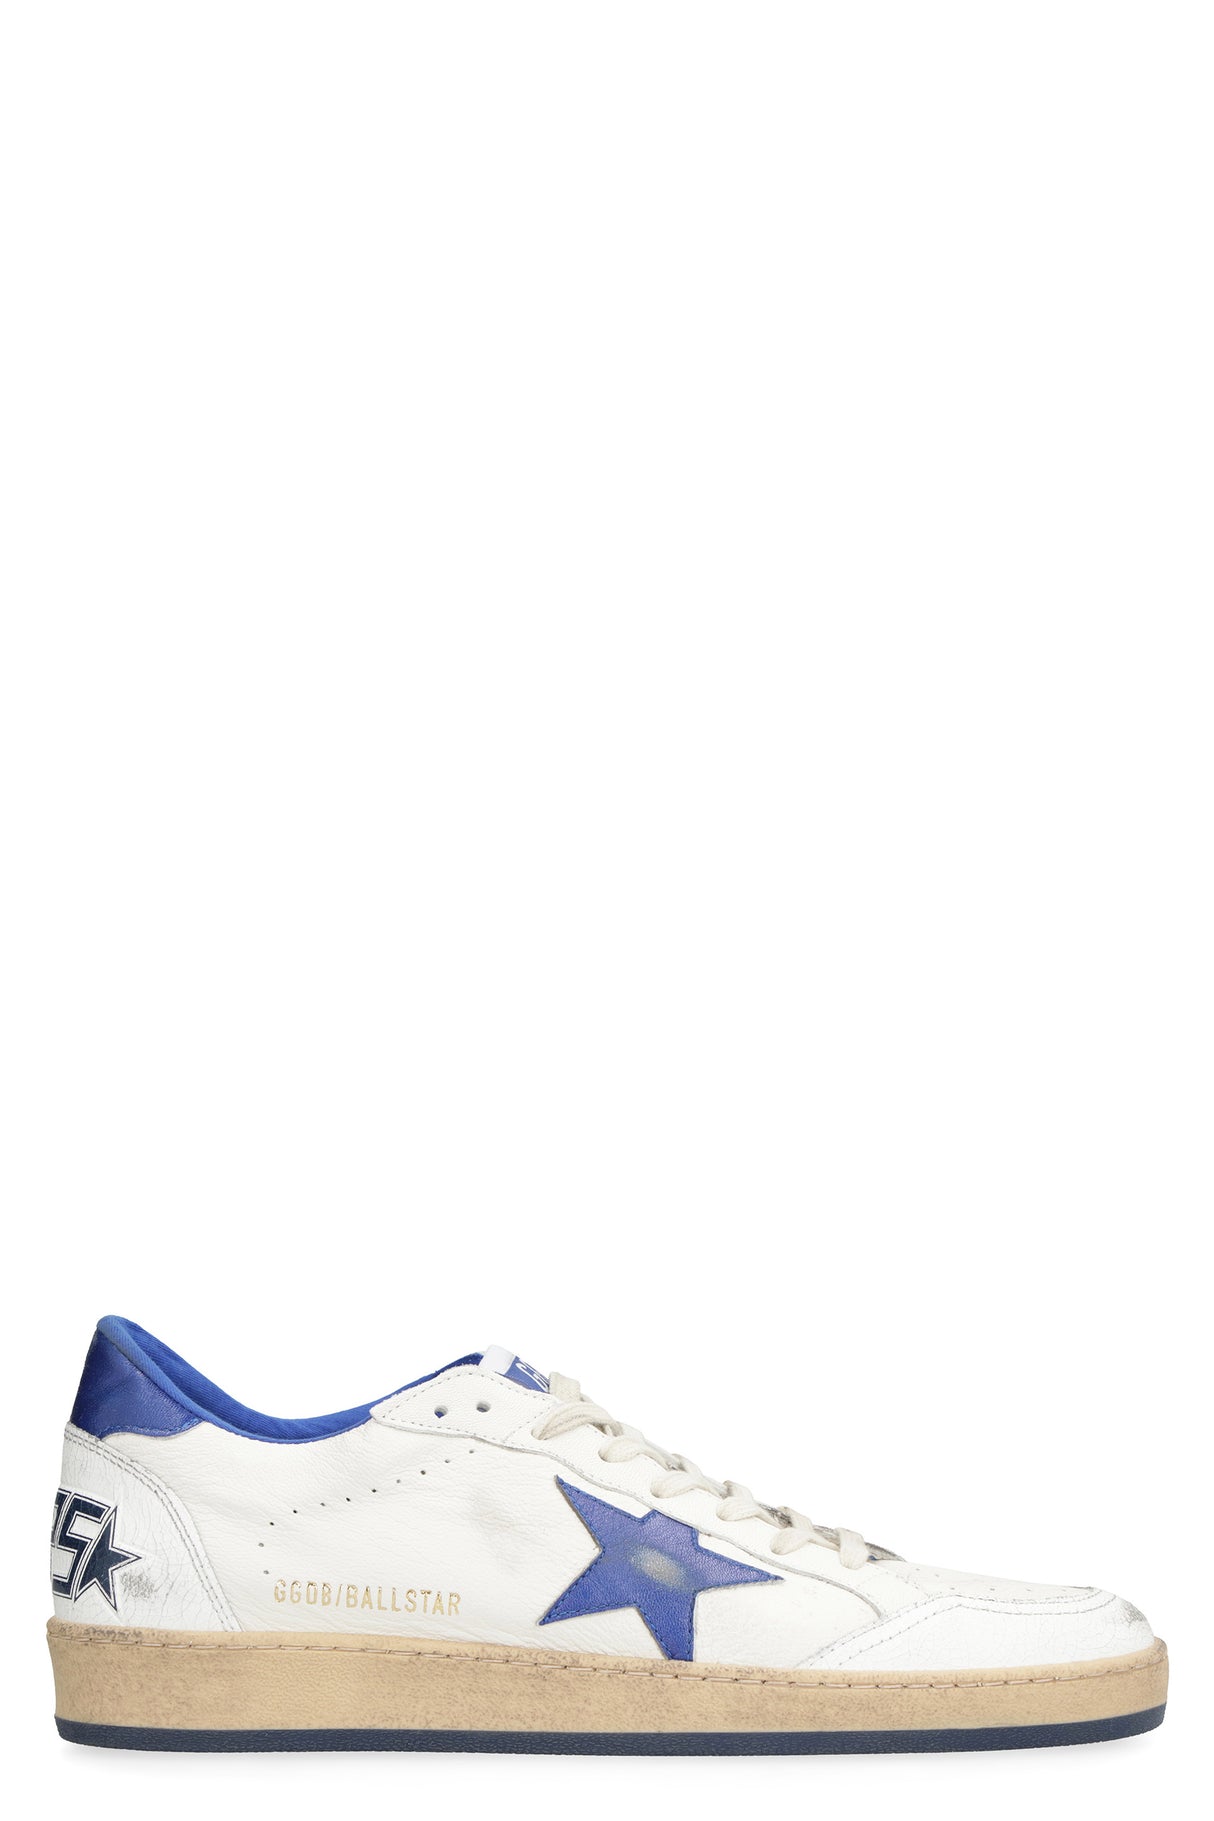 GOLDEN GOOSE White/Metallic Blue Sneaker by Deluxe Brand for Men - SS24 Collection